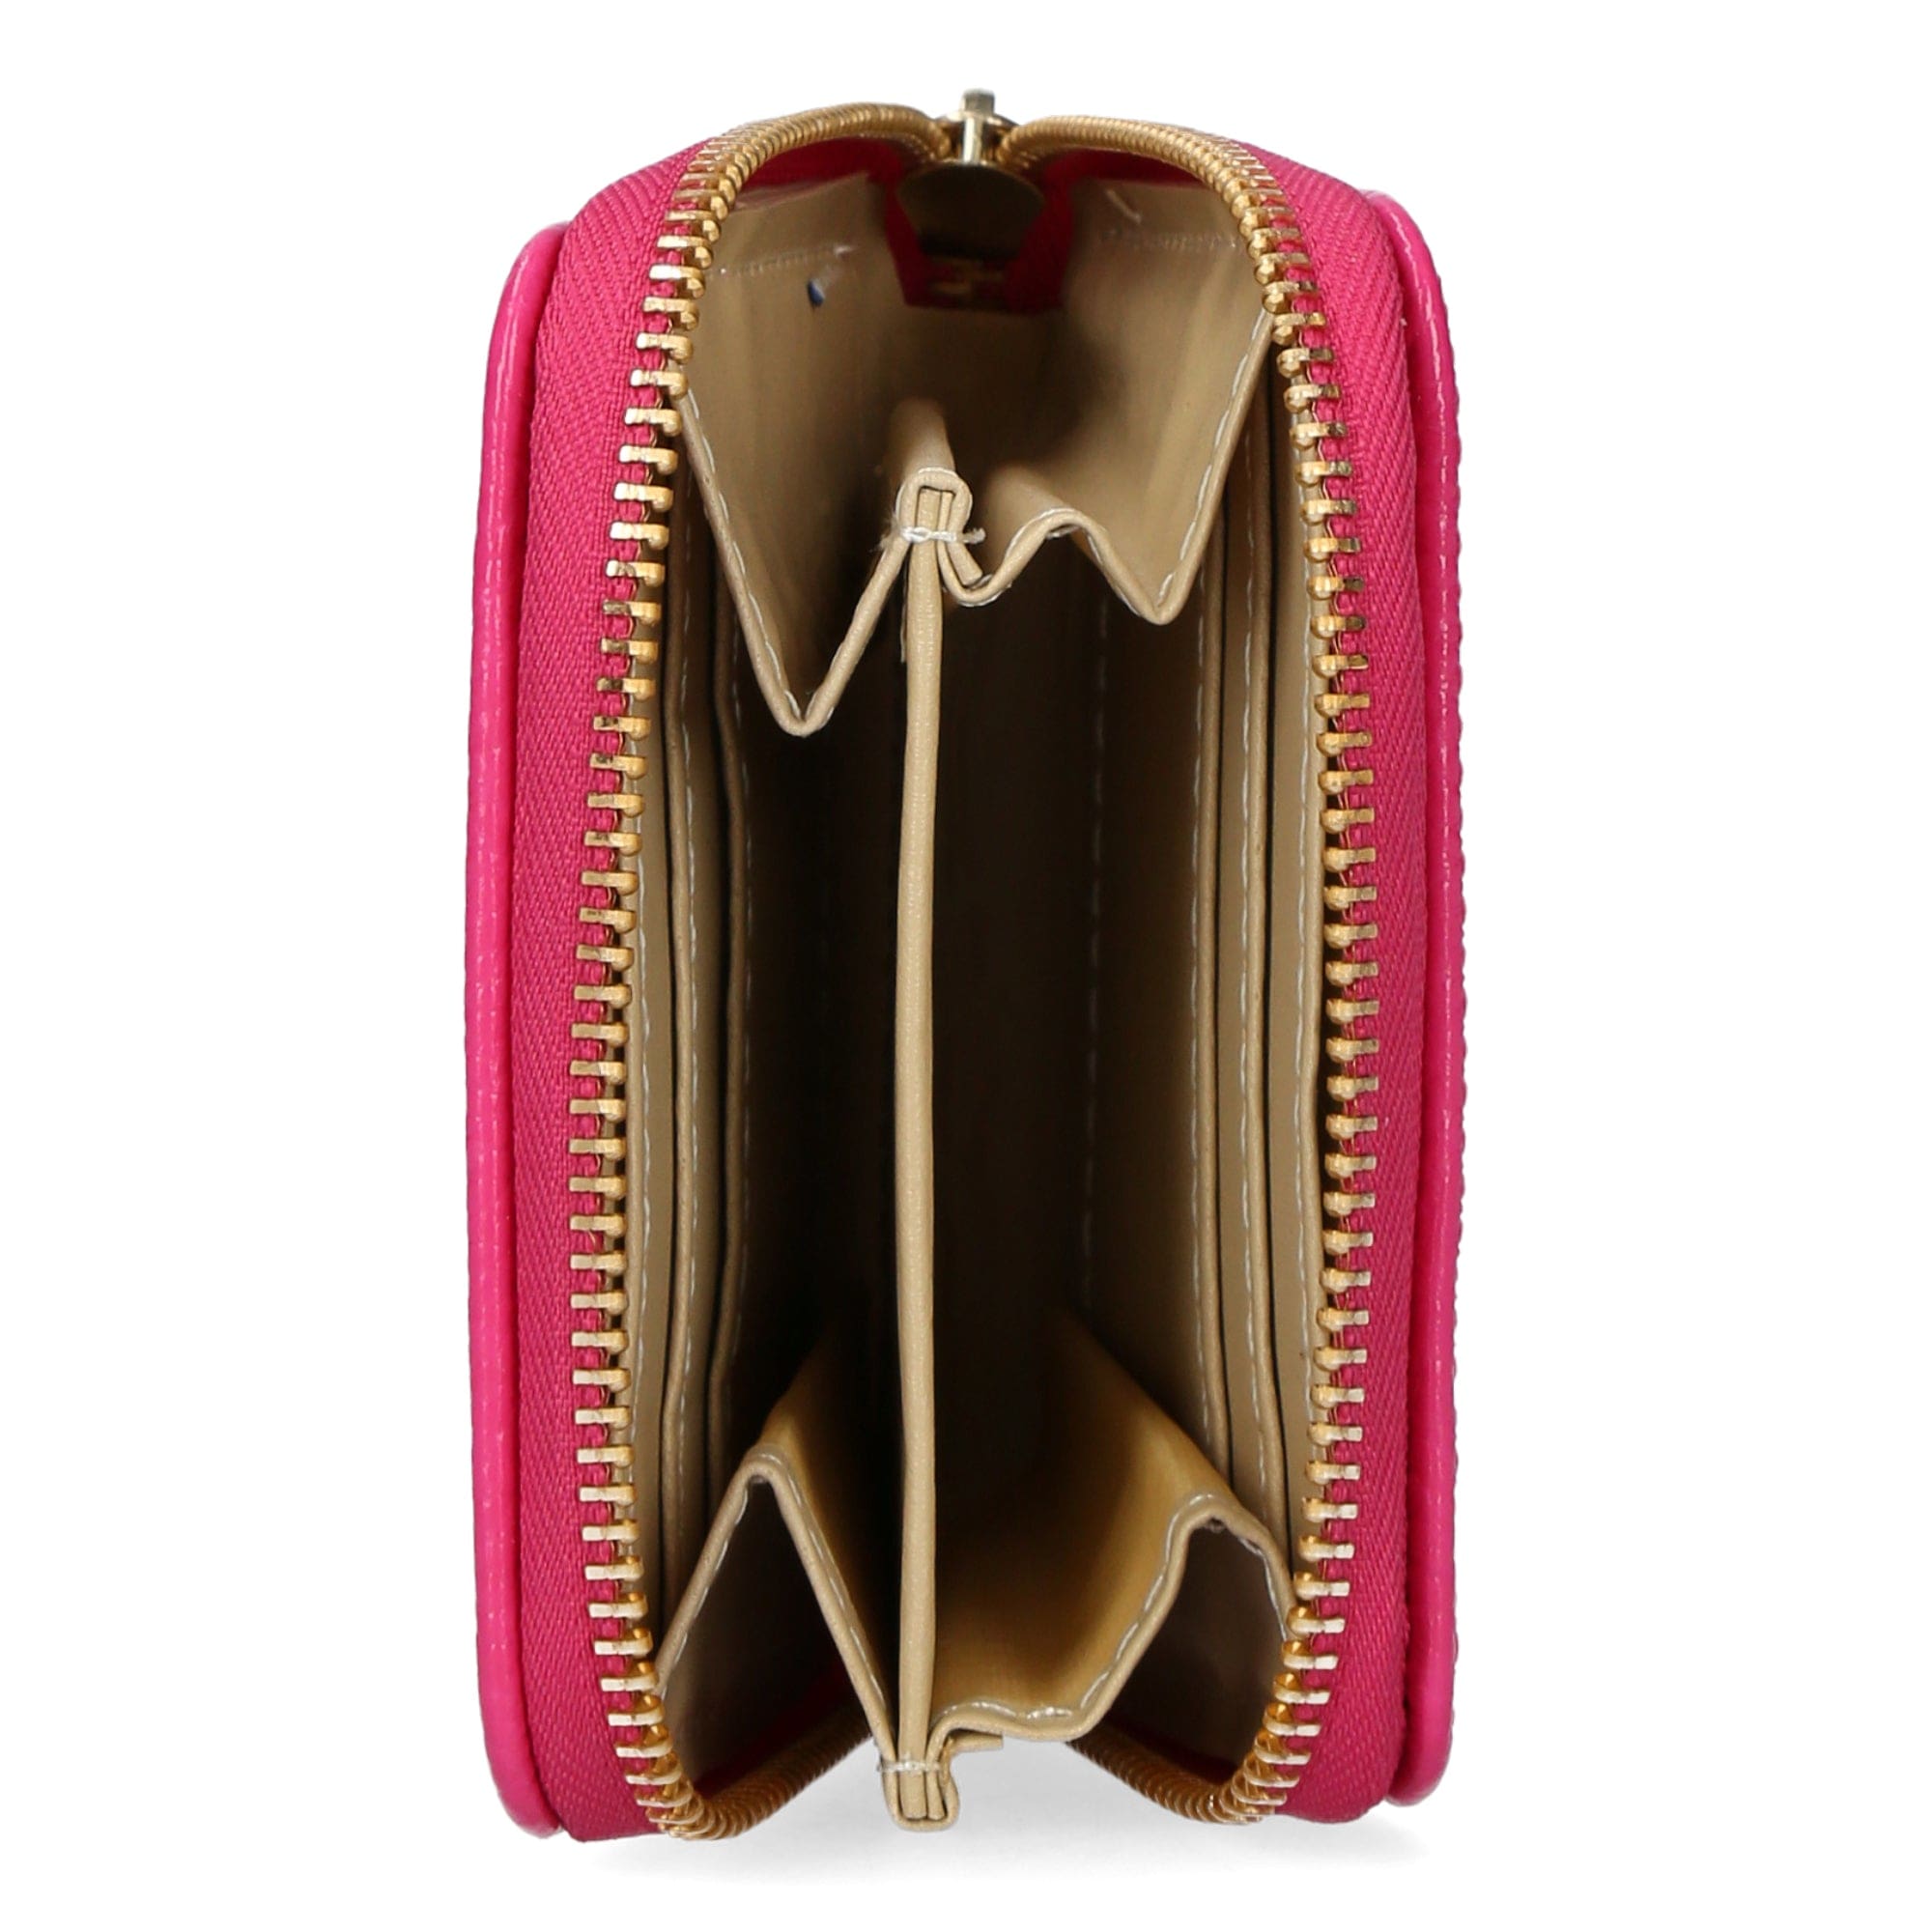 Ordener card case - Small leather goods